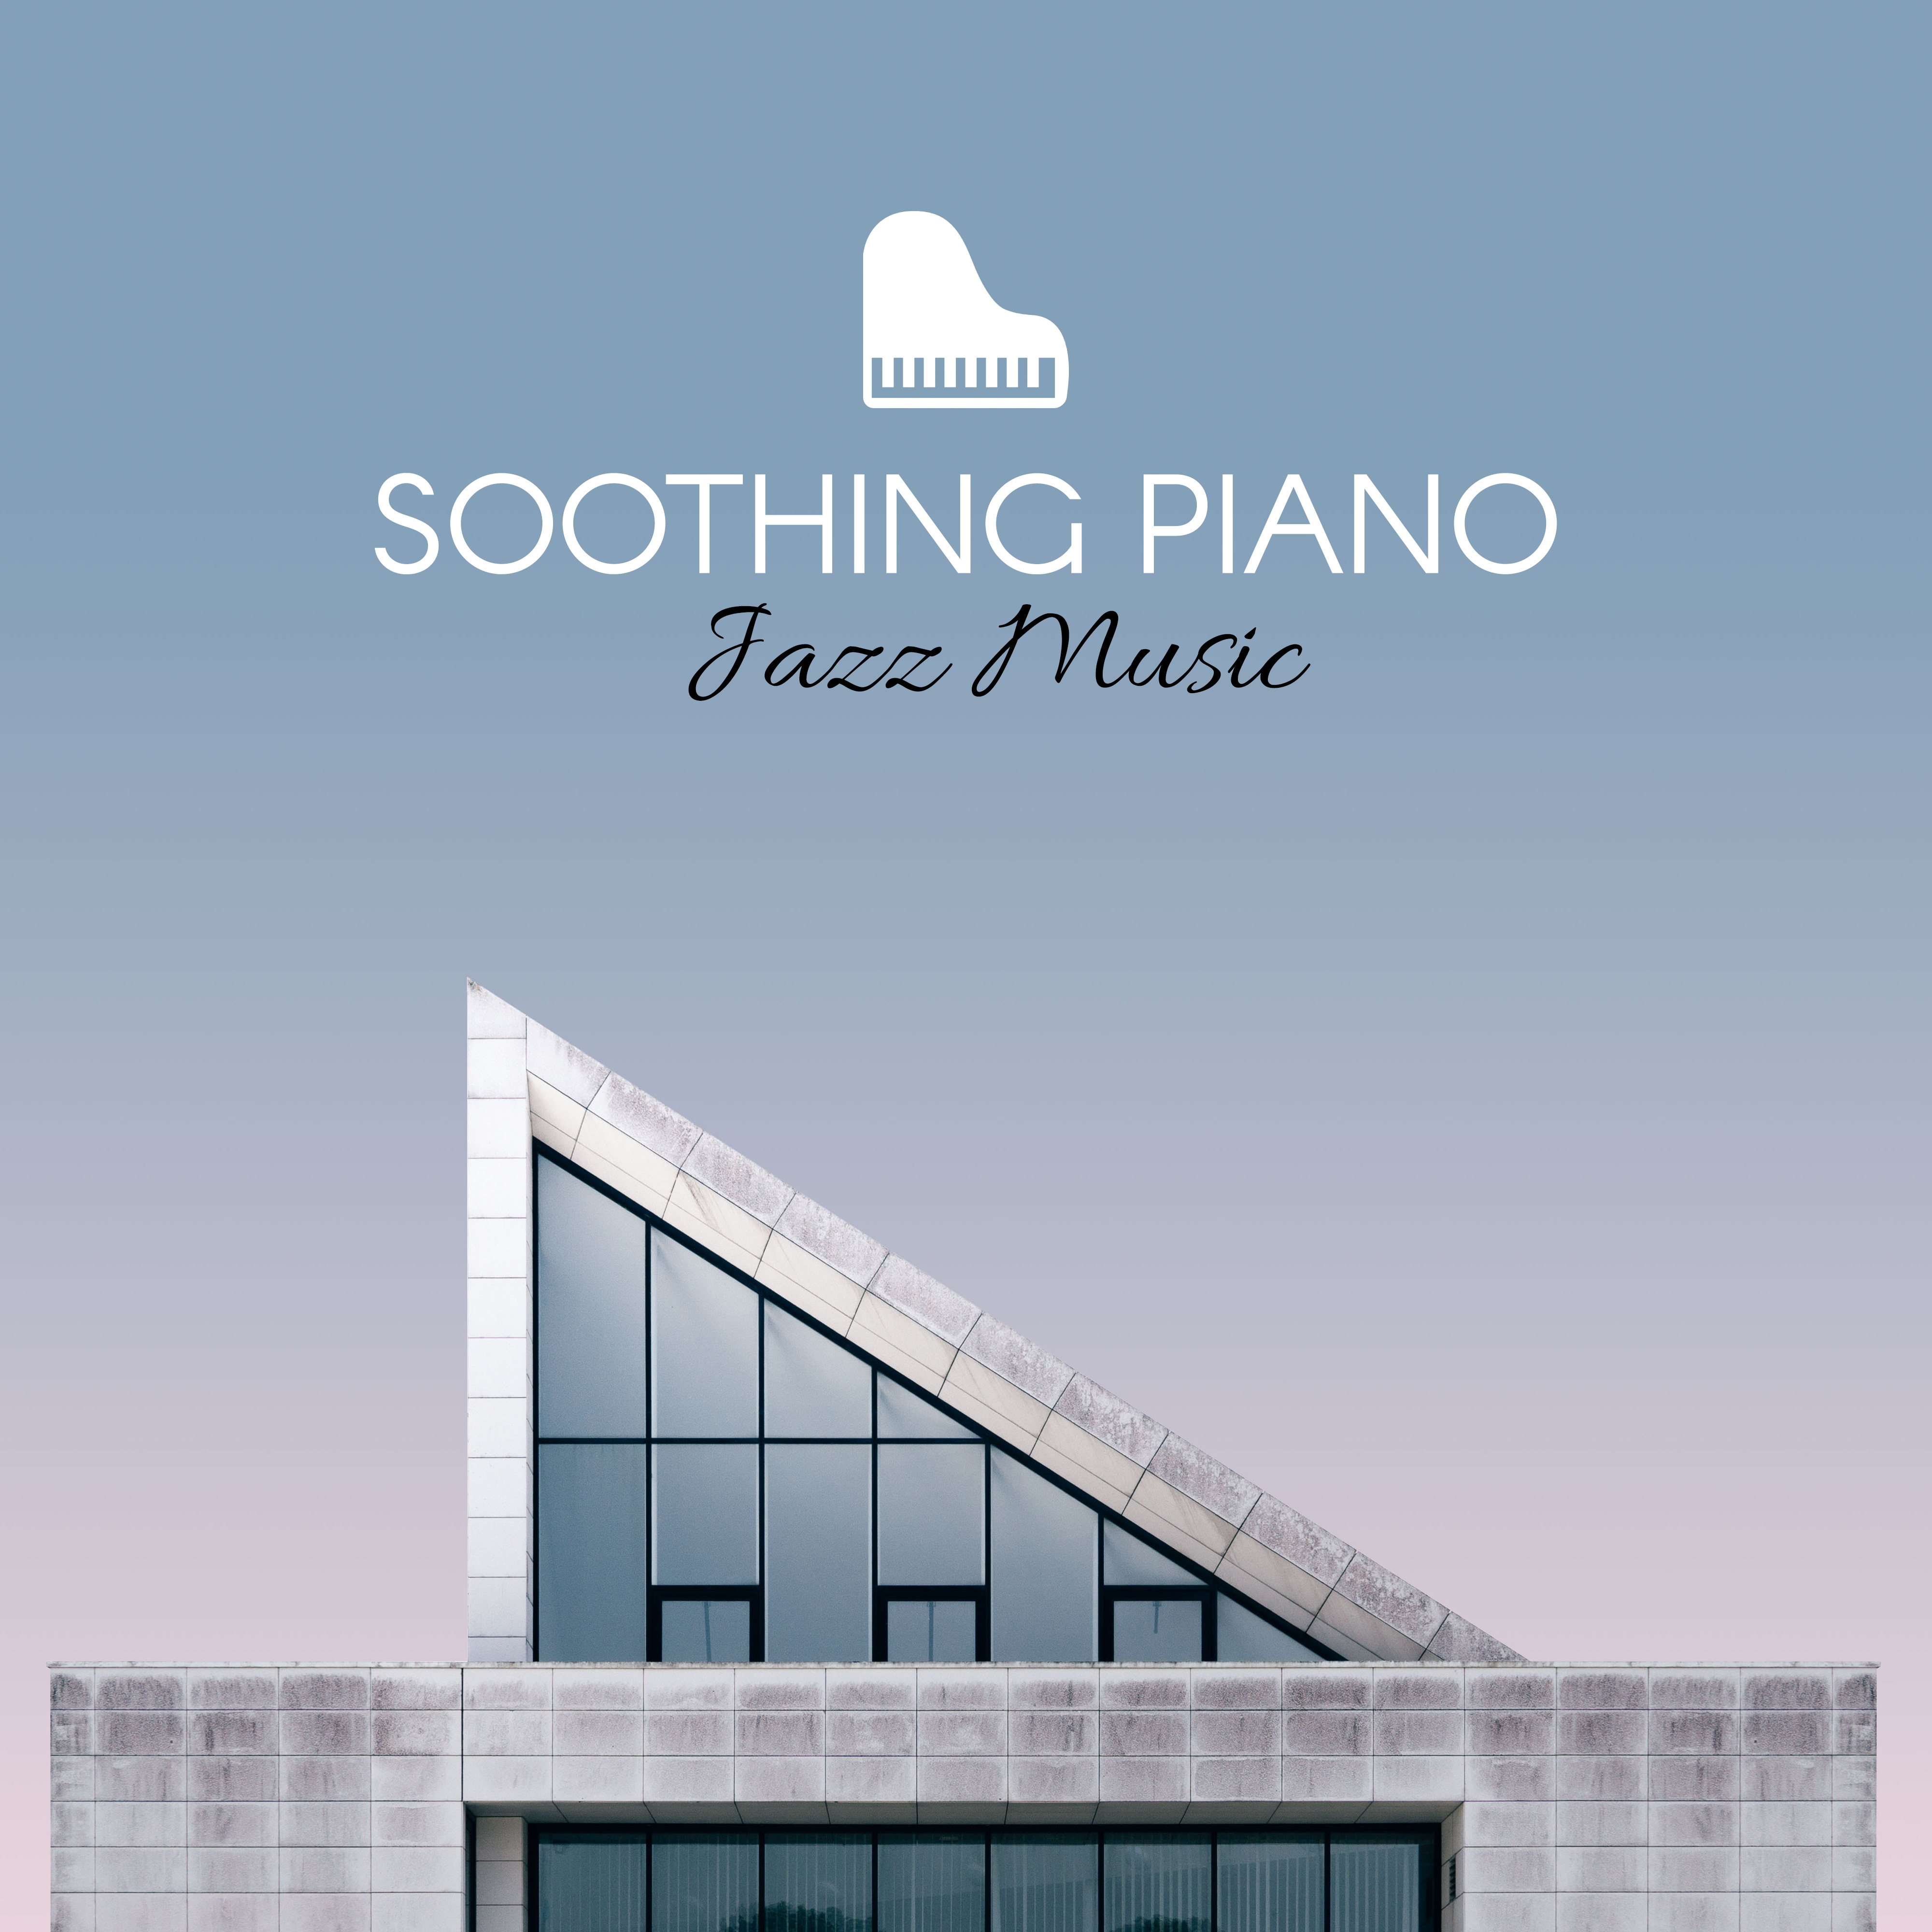 Soothing Piano Jazz Music